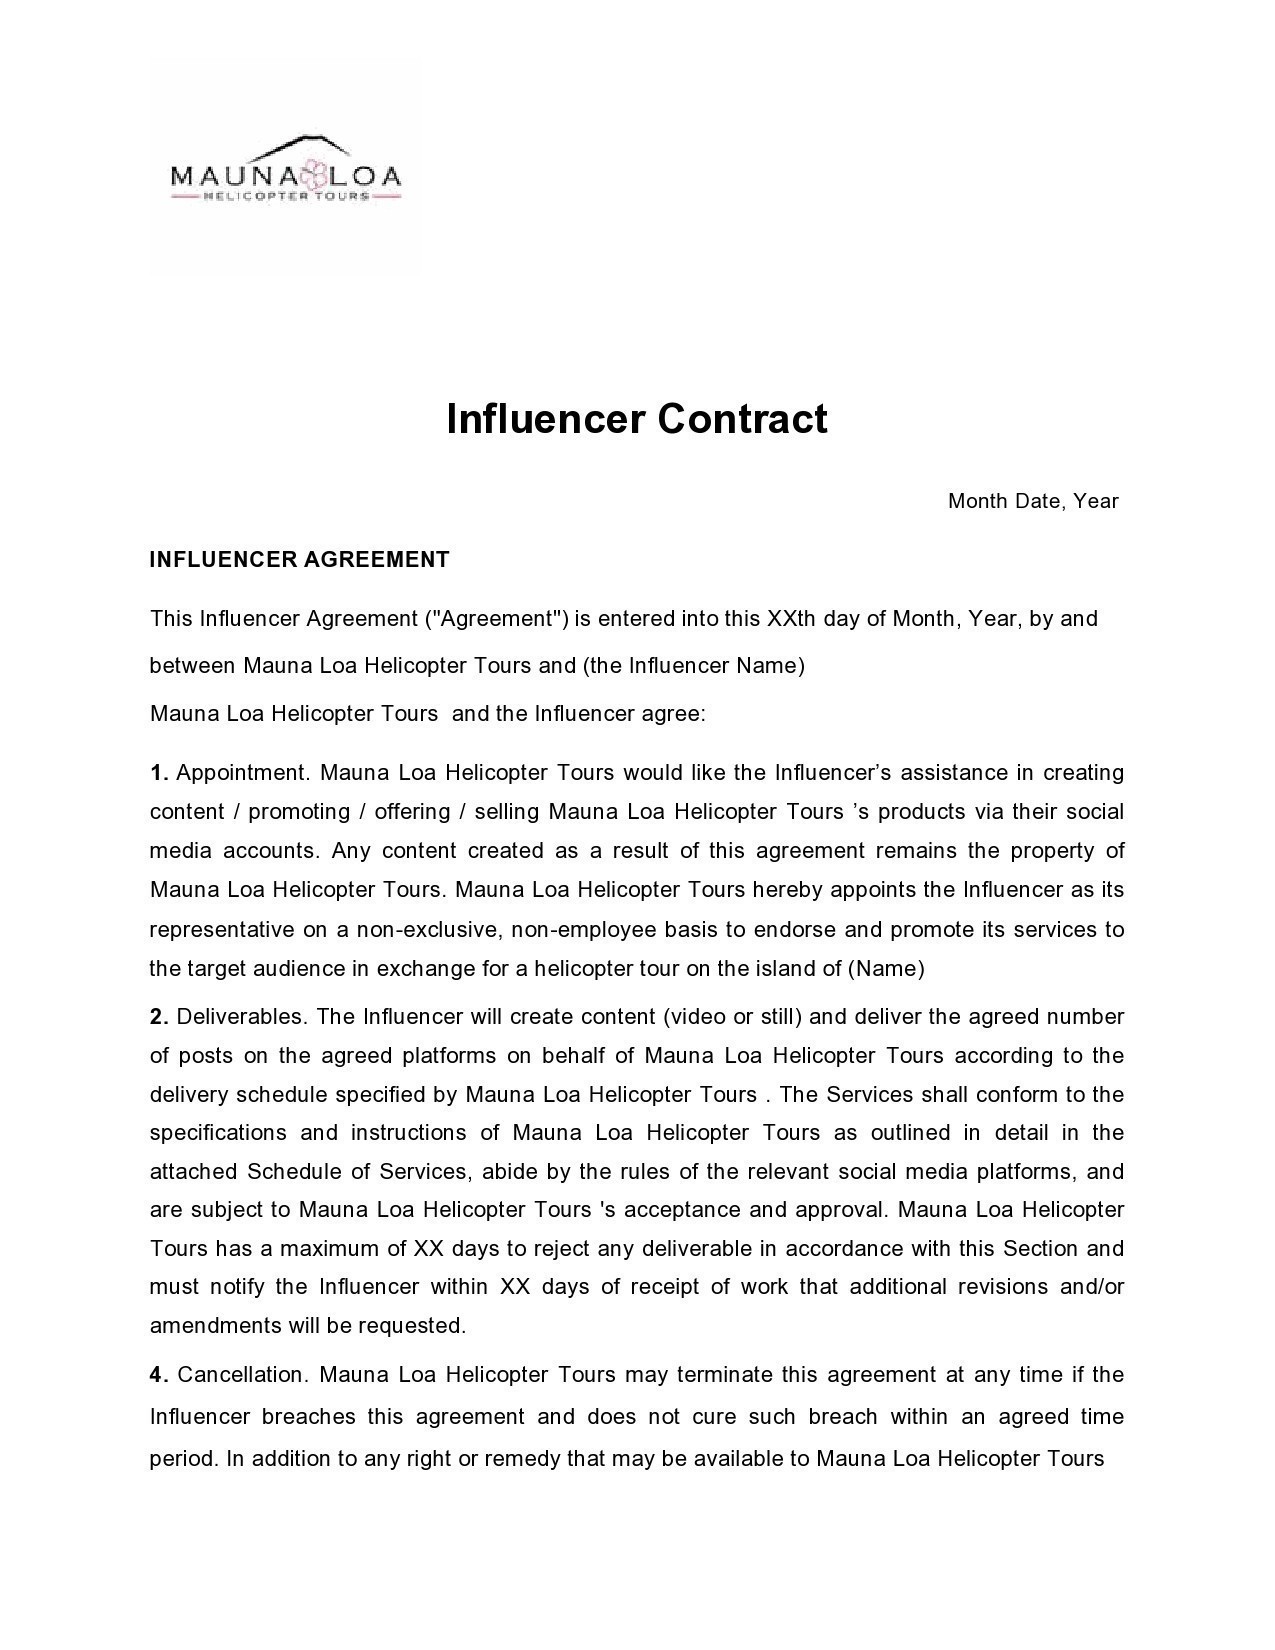 Free influencer contract template 02